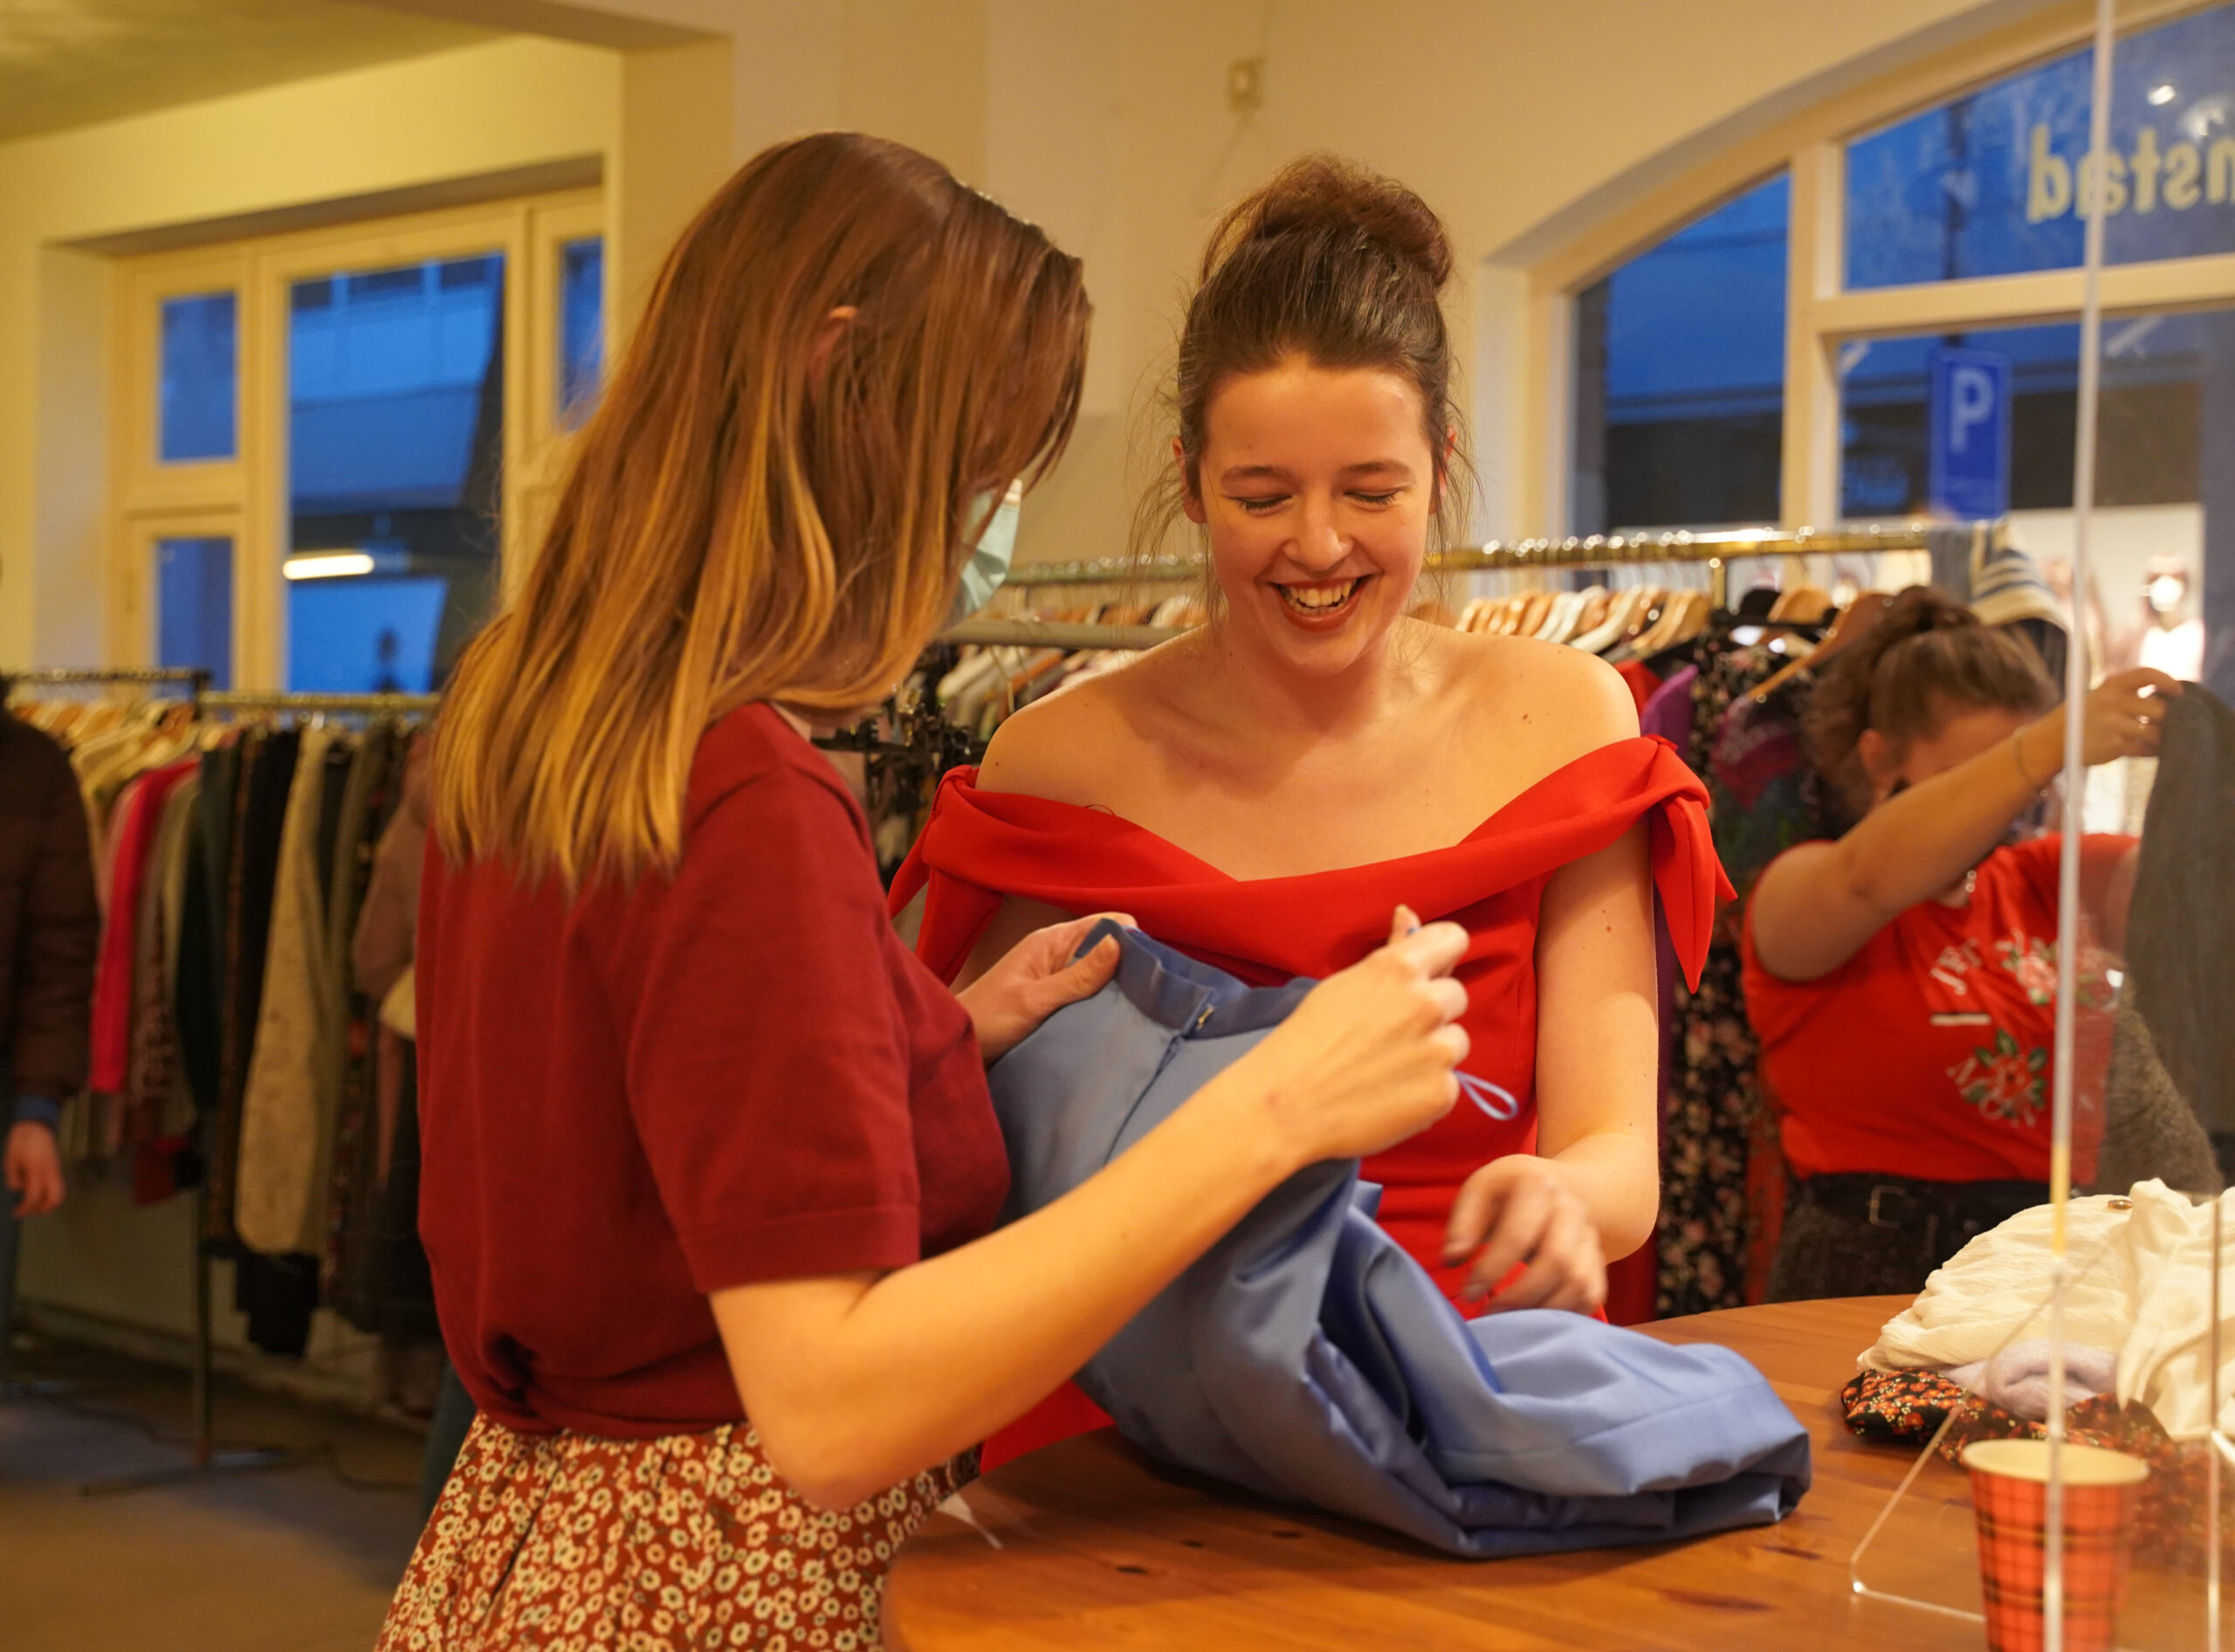 Pop-up boutique for clothing exchange ‘very successful’